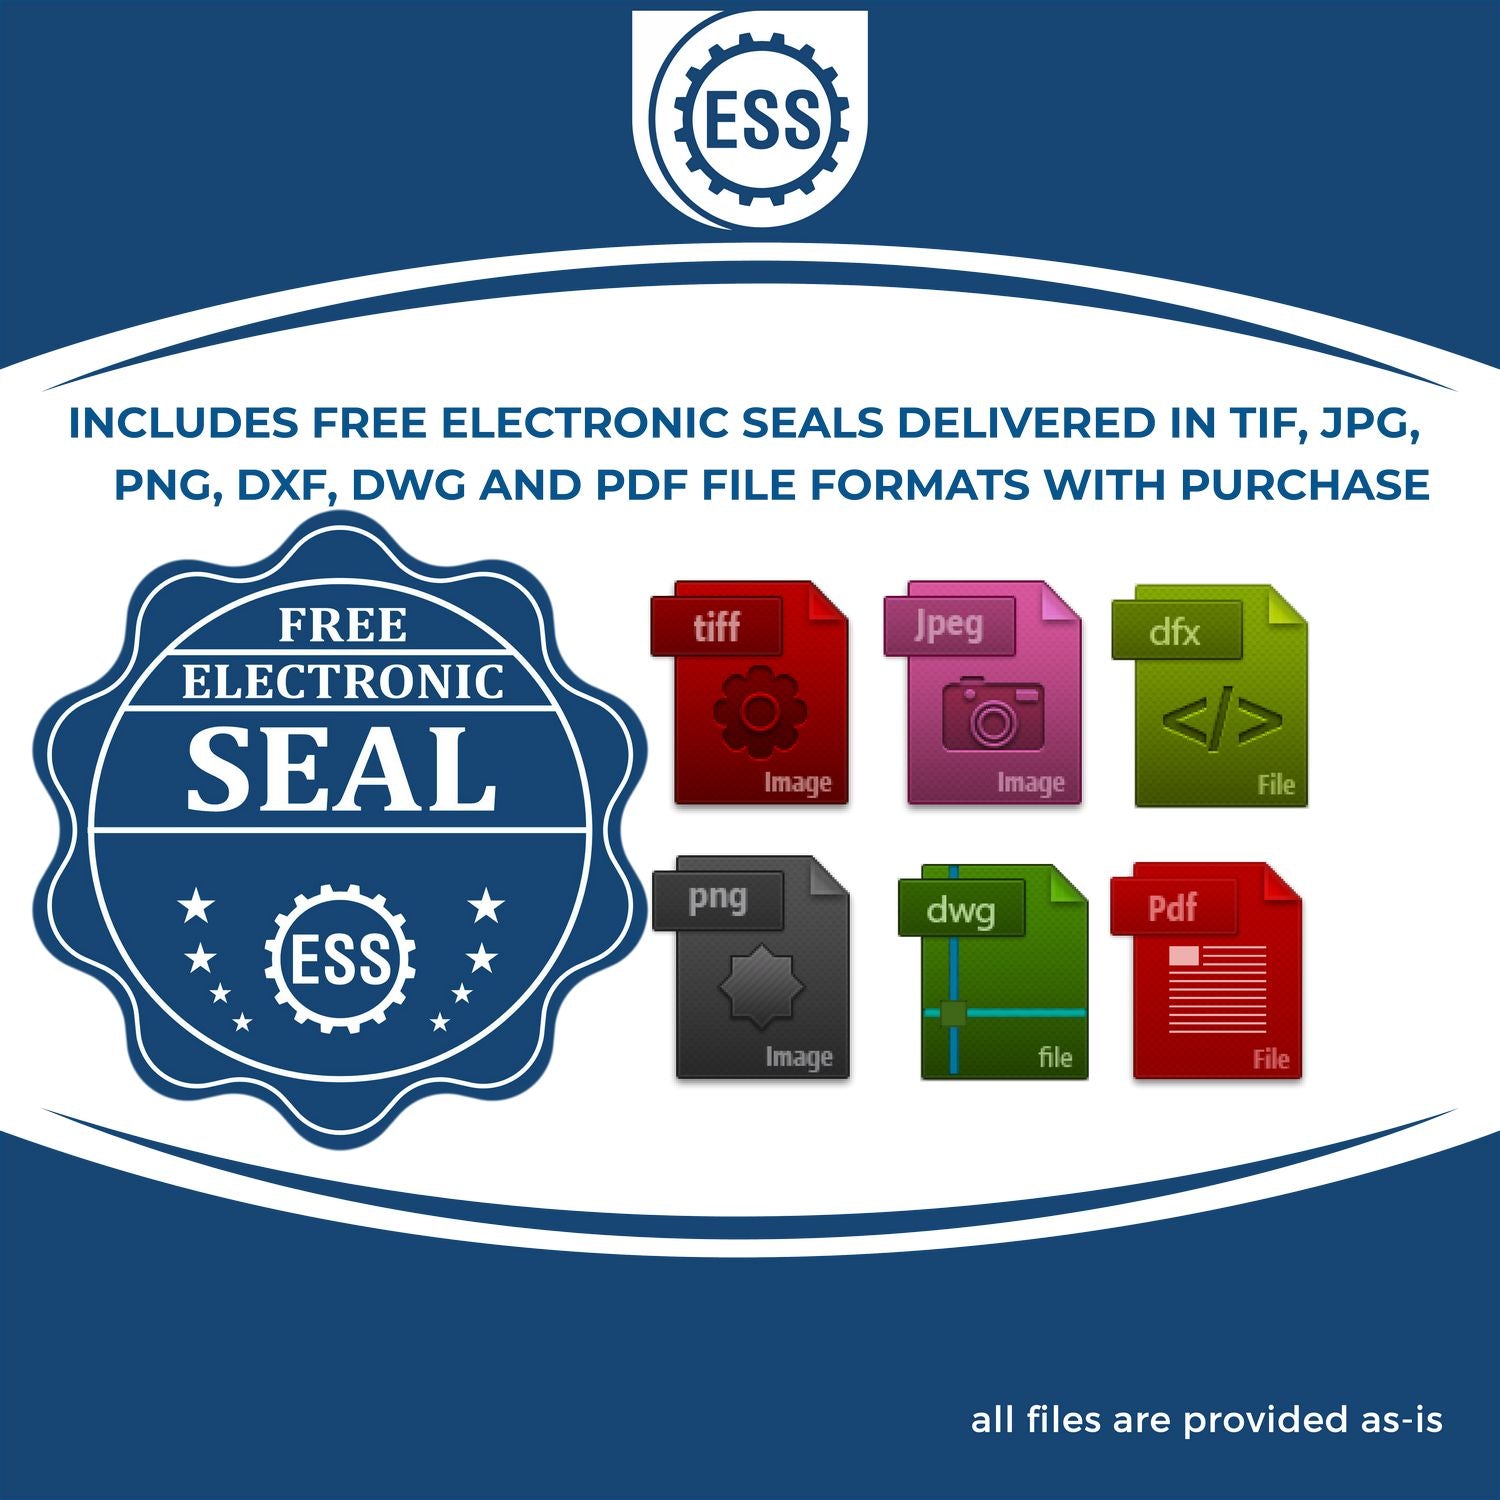 An infographic for the free electronic seal for the Gift North Carolina Architect Seal illustrating the different file type icons such as DXF, DWG, TIF, JPG and PNG.